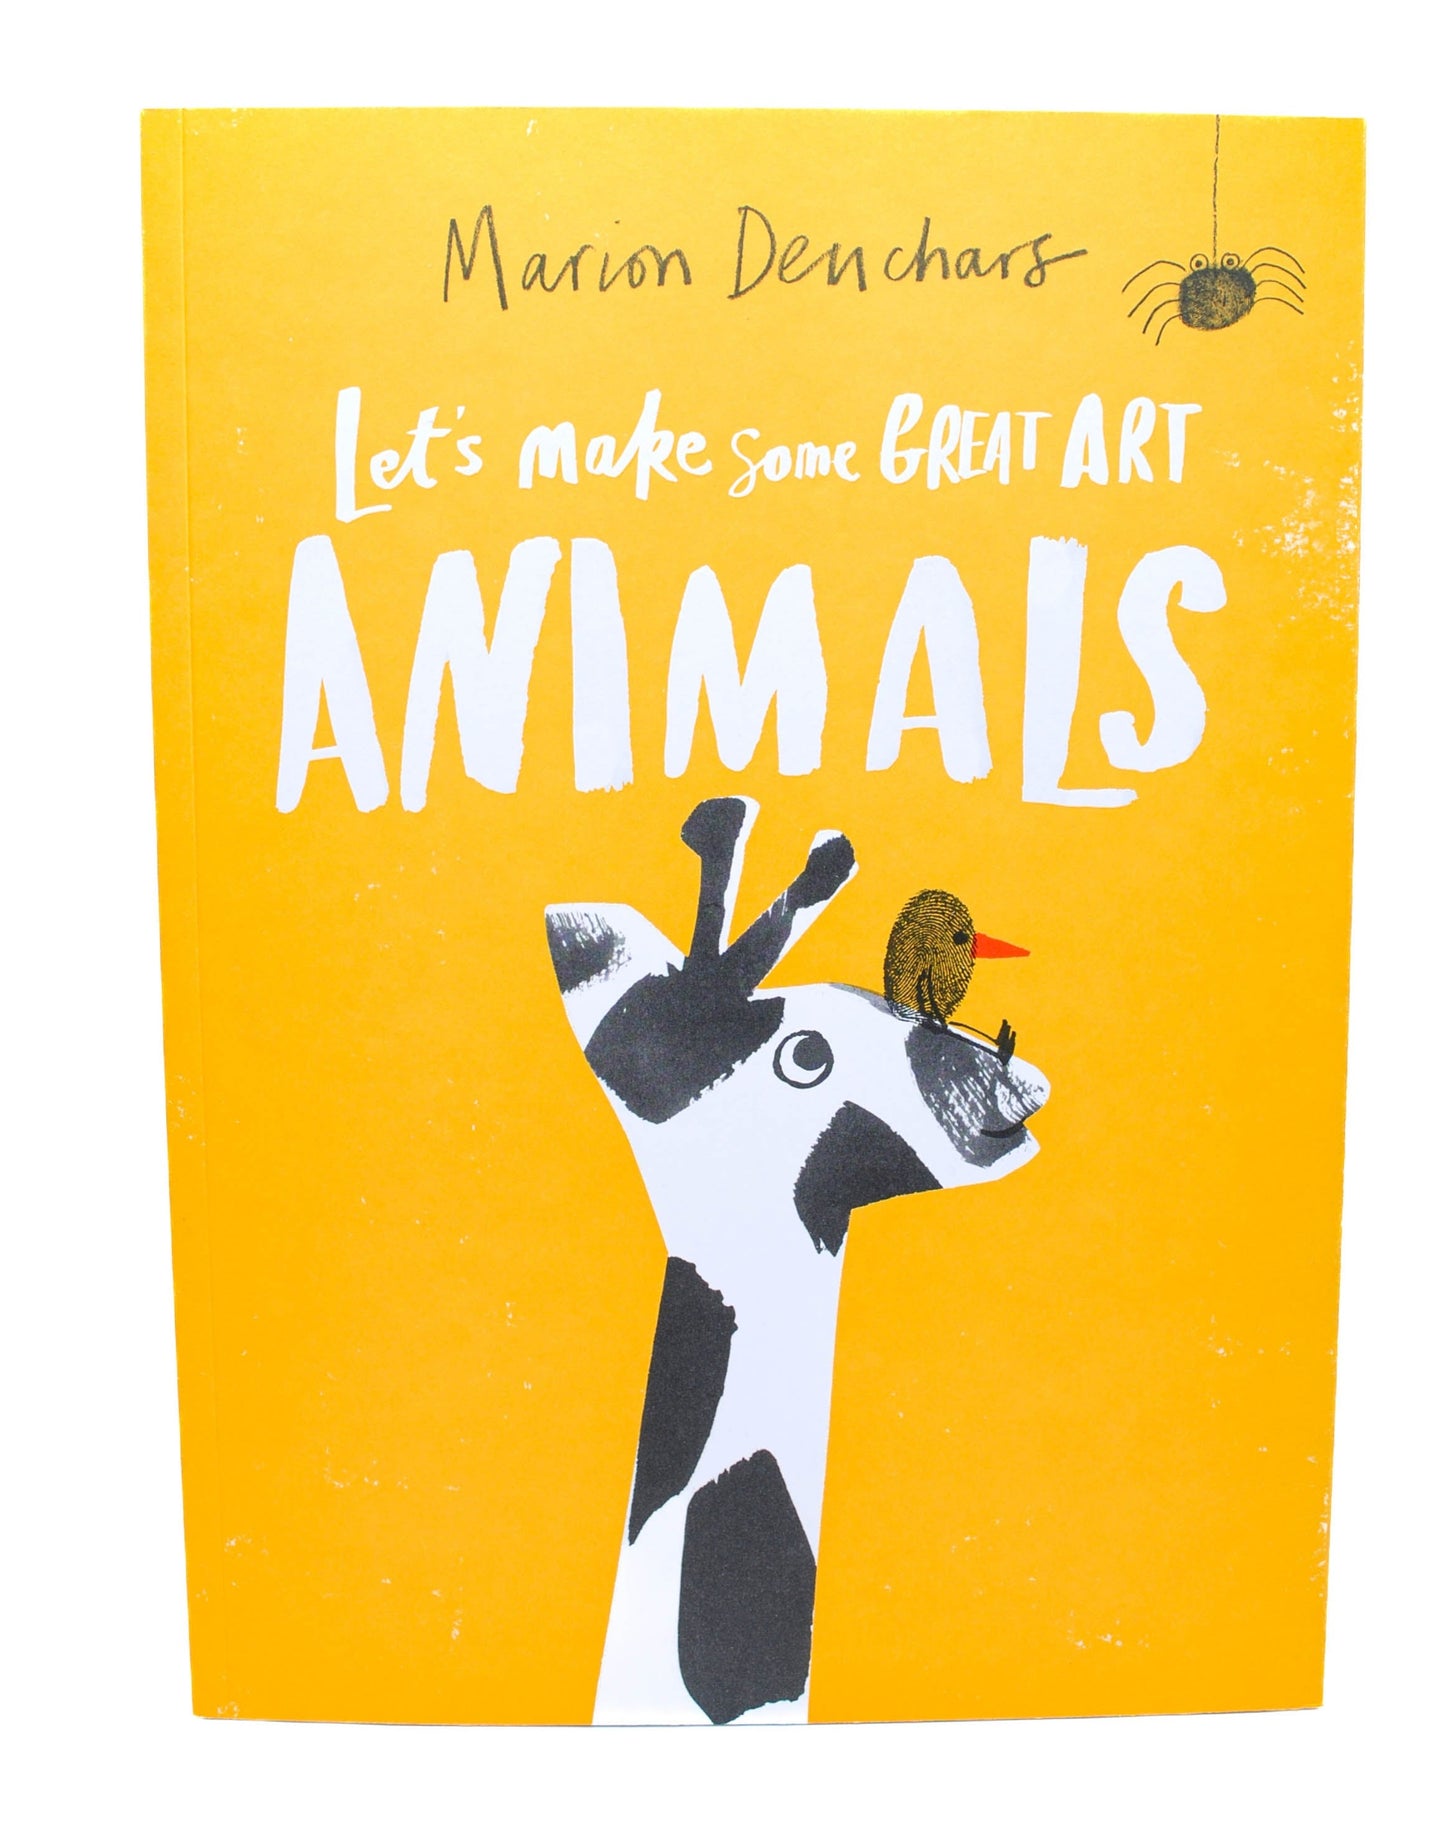 Let's Make Some Great Art: Animals